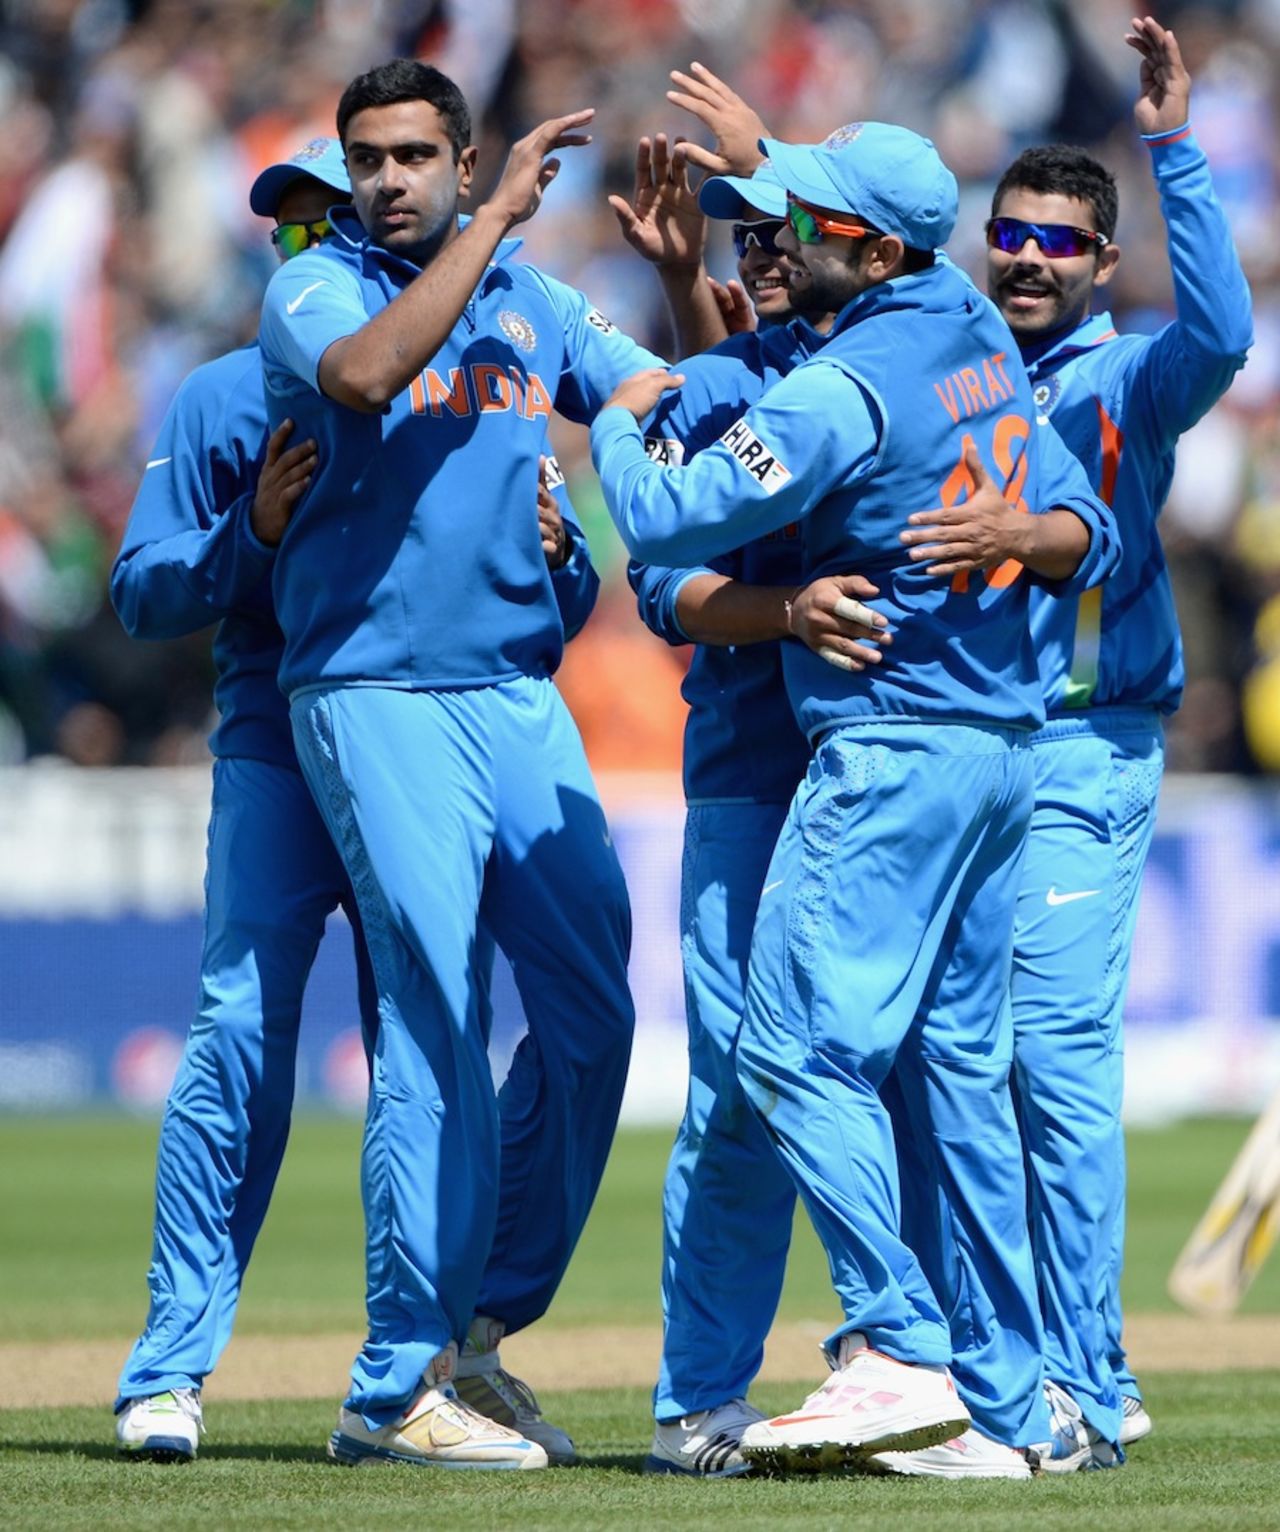 R Ashwin is congratulated after a wicket, India v Pakistan, Champions Trophy, Group B, Edgbaston, June 15, 2013